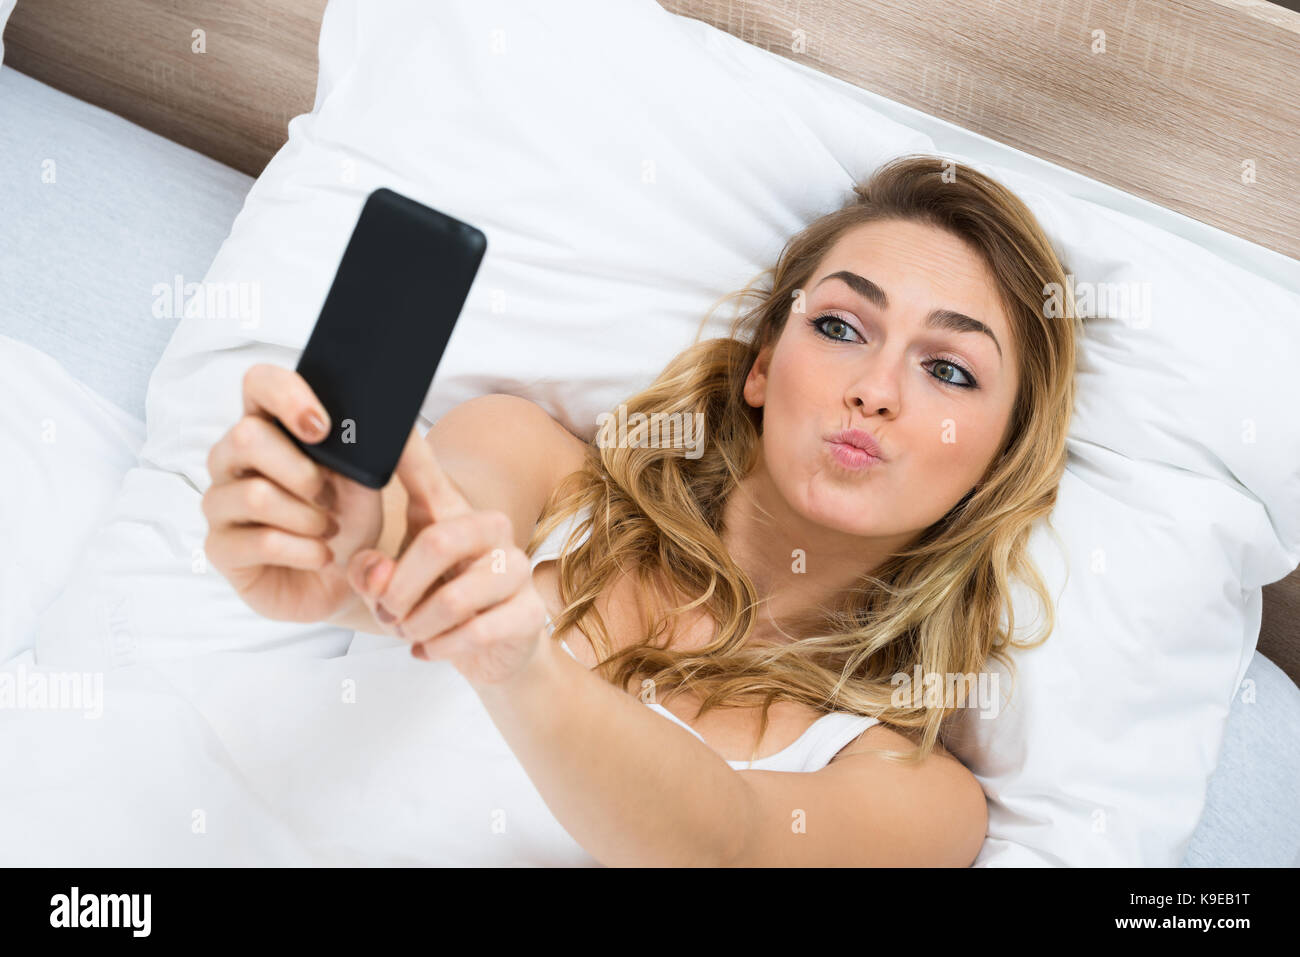 High Angle View Of A Young Woman Lying On Bed Taking Selfie Stock Photo